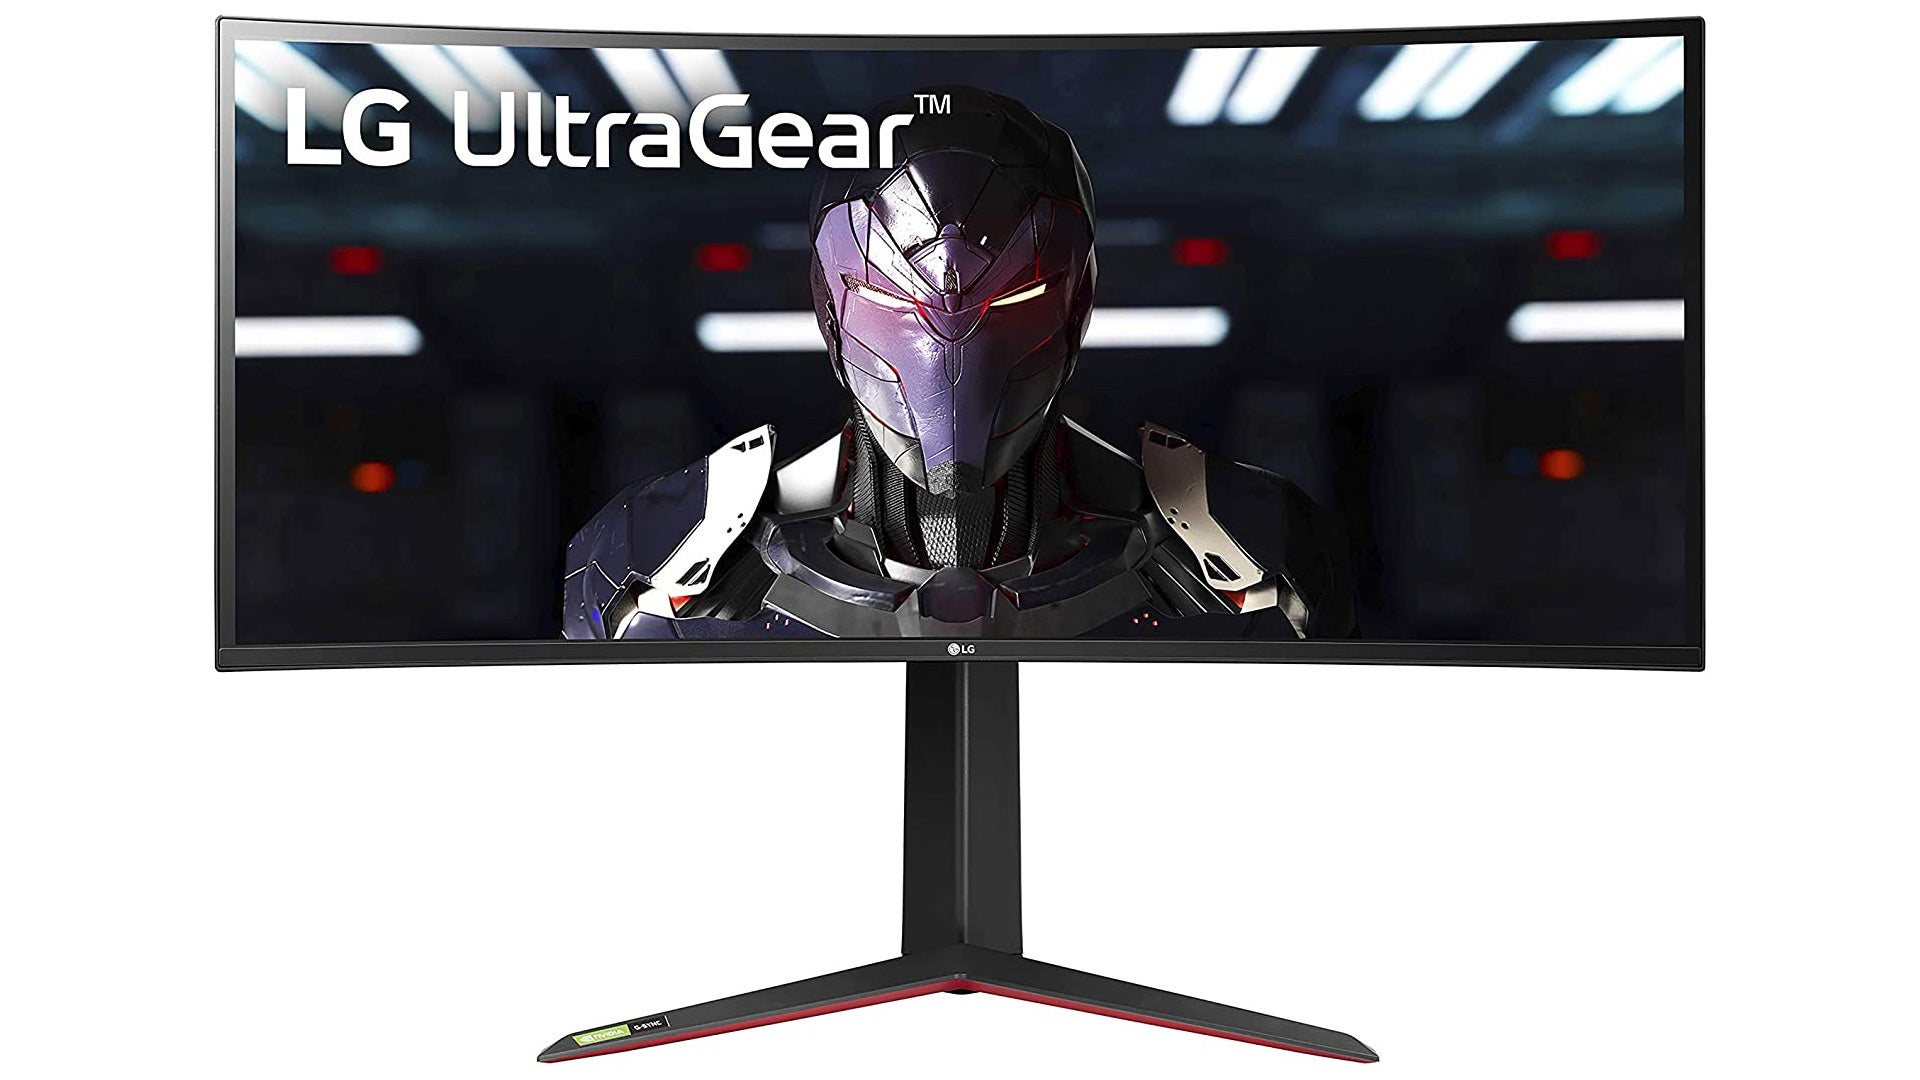 a photo of a 34-inch LG ultra-wide monitor, which is particularly good for gaming